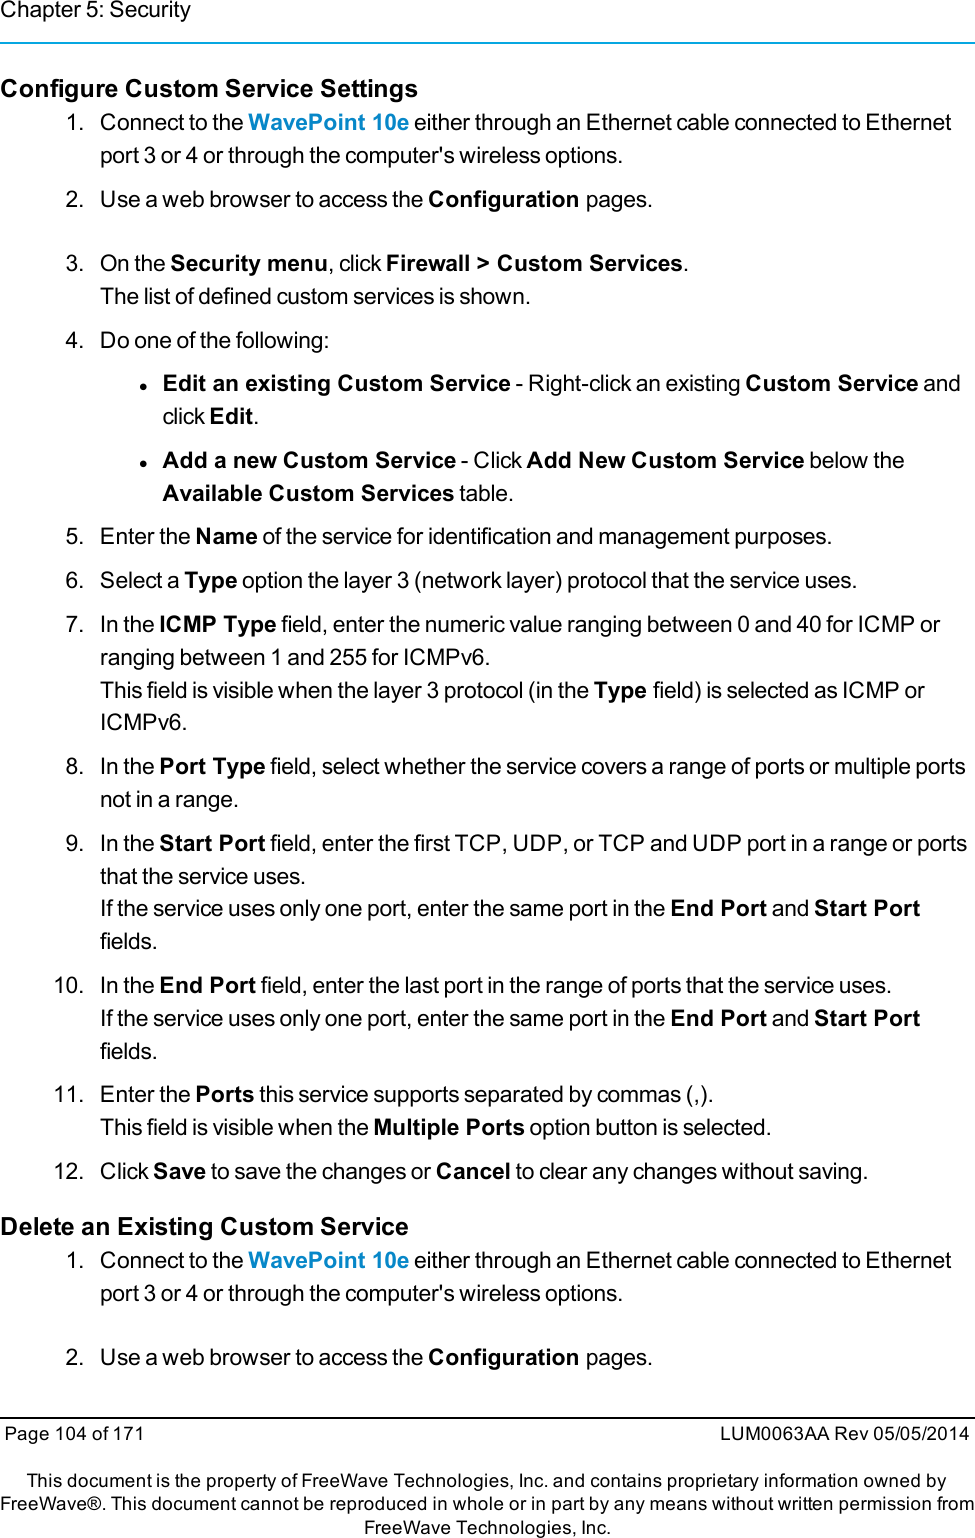 Chapter 5: SecurityConfigure Custom Service Settings1. Connect to the WavePoint 10e either through an Ethernet cable connected to Ethernetport 3 or 4 or through the computer&apos;s wireless options.2. Use a web browser to access the Configuration pages.3. On the Security menu, click Firewall &gt; Custom Services.The list of defined custom services is shown.4. Do one of the following:lEdit an existing Custom Service - Right-click an existing Custom Service andclick Edit.lAdd a new Custom Service - Click Add New Custom Service below theAvailable Custom Services table.5. Enter the Name of the service for identification and management purposes.6. Select a Type option the layer 3 (network layer) protocol that the service uses.7. In the ICMP Type field, enter the numeric value ranging between 0 and 40 for ICMP orranging between 1 and 255 for ICMPv6.This field is visible when the layer 3 protocol (in the Type field) is selected as ICMP orICMPv6.8. In the Port Type field, select whether the service covers a range of ports or multiple portsnot in a range.9. In the Start Port field, enter the first TCP, UDP, or TCP and UDP port in a range or portsthat the service uses.If the service uses only one port, enter the same port in the End Port and Start Portfields.10. In the End Port field, enter the last port in the range of ports that the service uses.If the service uses only one port, enter the same port in the End Port and Start Portfields.11. Enter the Ports this service supports separated by commas (,).This field is visible when the Multiple Ports option button is selected.12. Click Save to save the changes or Cancel to clear any changes without saving.Delete an Existing Custom Service1. Connect to the WavePoint 10e either through an Ethernet cable connected to Ethernetport 3 or 4 or through the computer&apos;s wireless options.2. Use a web browser to access the Configuration pages.Page 104 of 171 LUM0063AA Rev 05/05/2014This document is the property of FreeWave Technologies, Inc. and contains proprietary information owned byFreeWave®. This document cannot be reproduced in whole or in part by any means without written permission fromFreeWave Technologies, Inc.